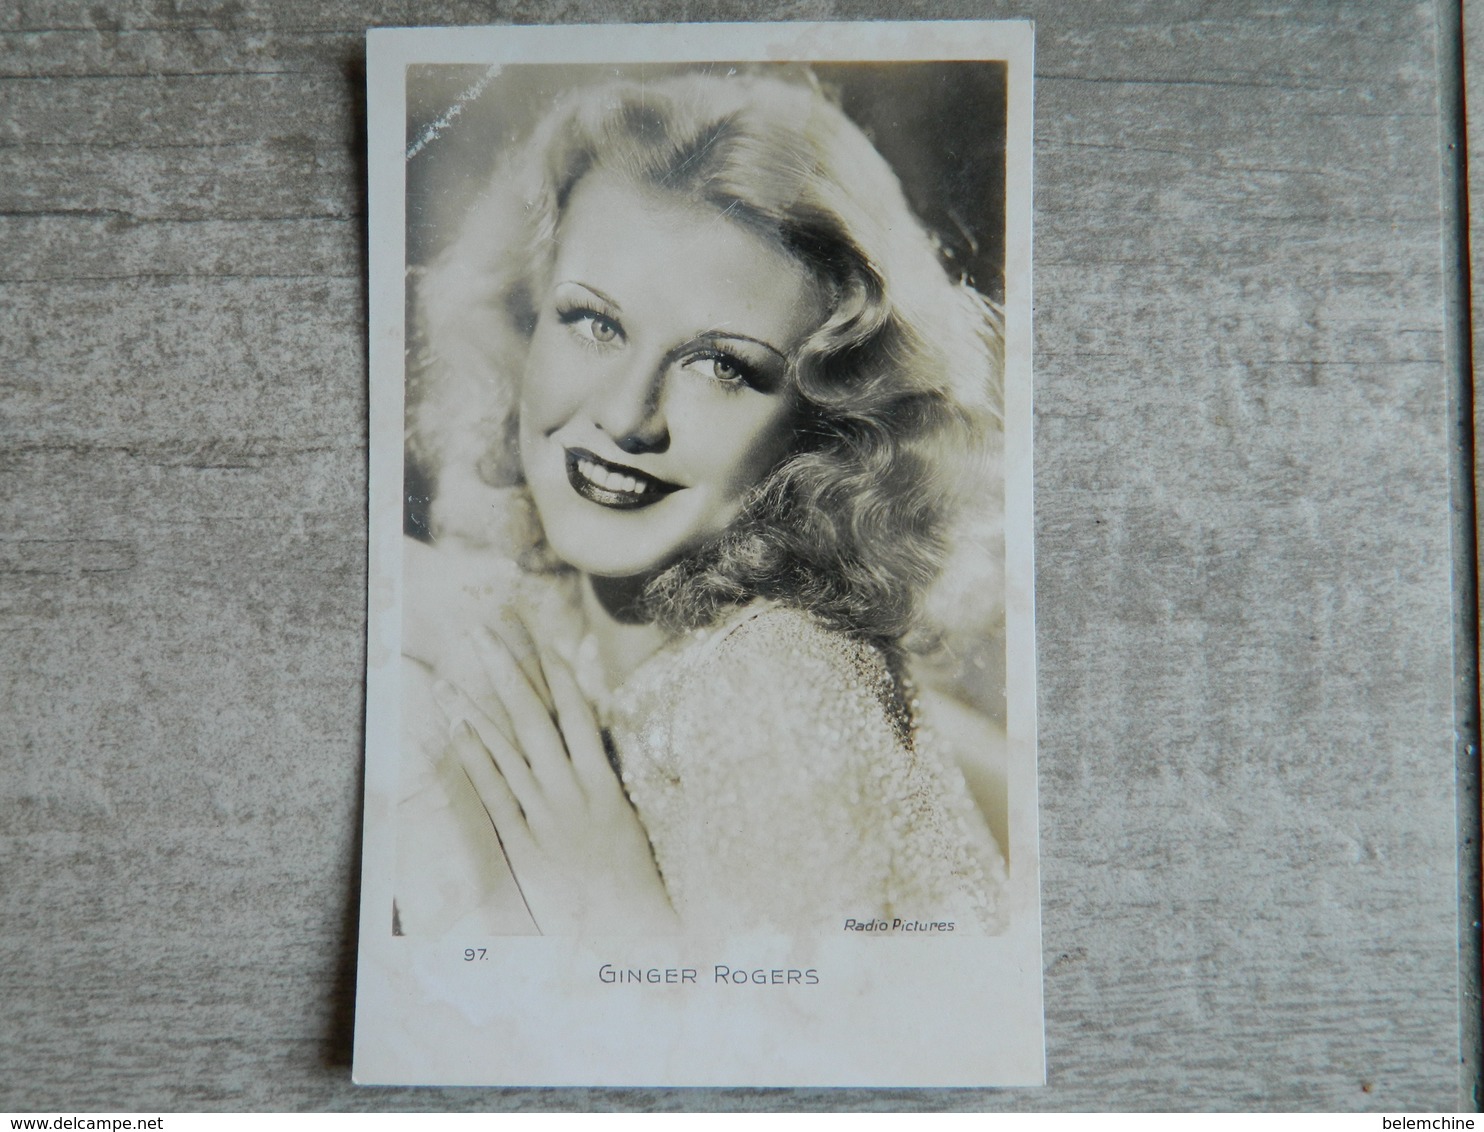 GINGER ROGERS                  ACTRICE ET DANSEUSE AMERICAINE            PHOTOGRAPHIE  RADIO PICTURE - Künstler